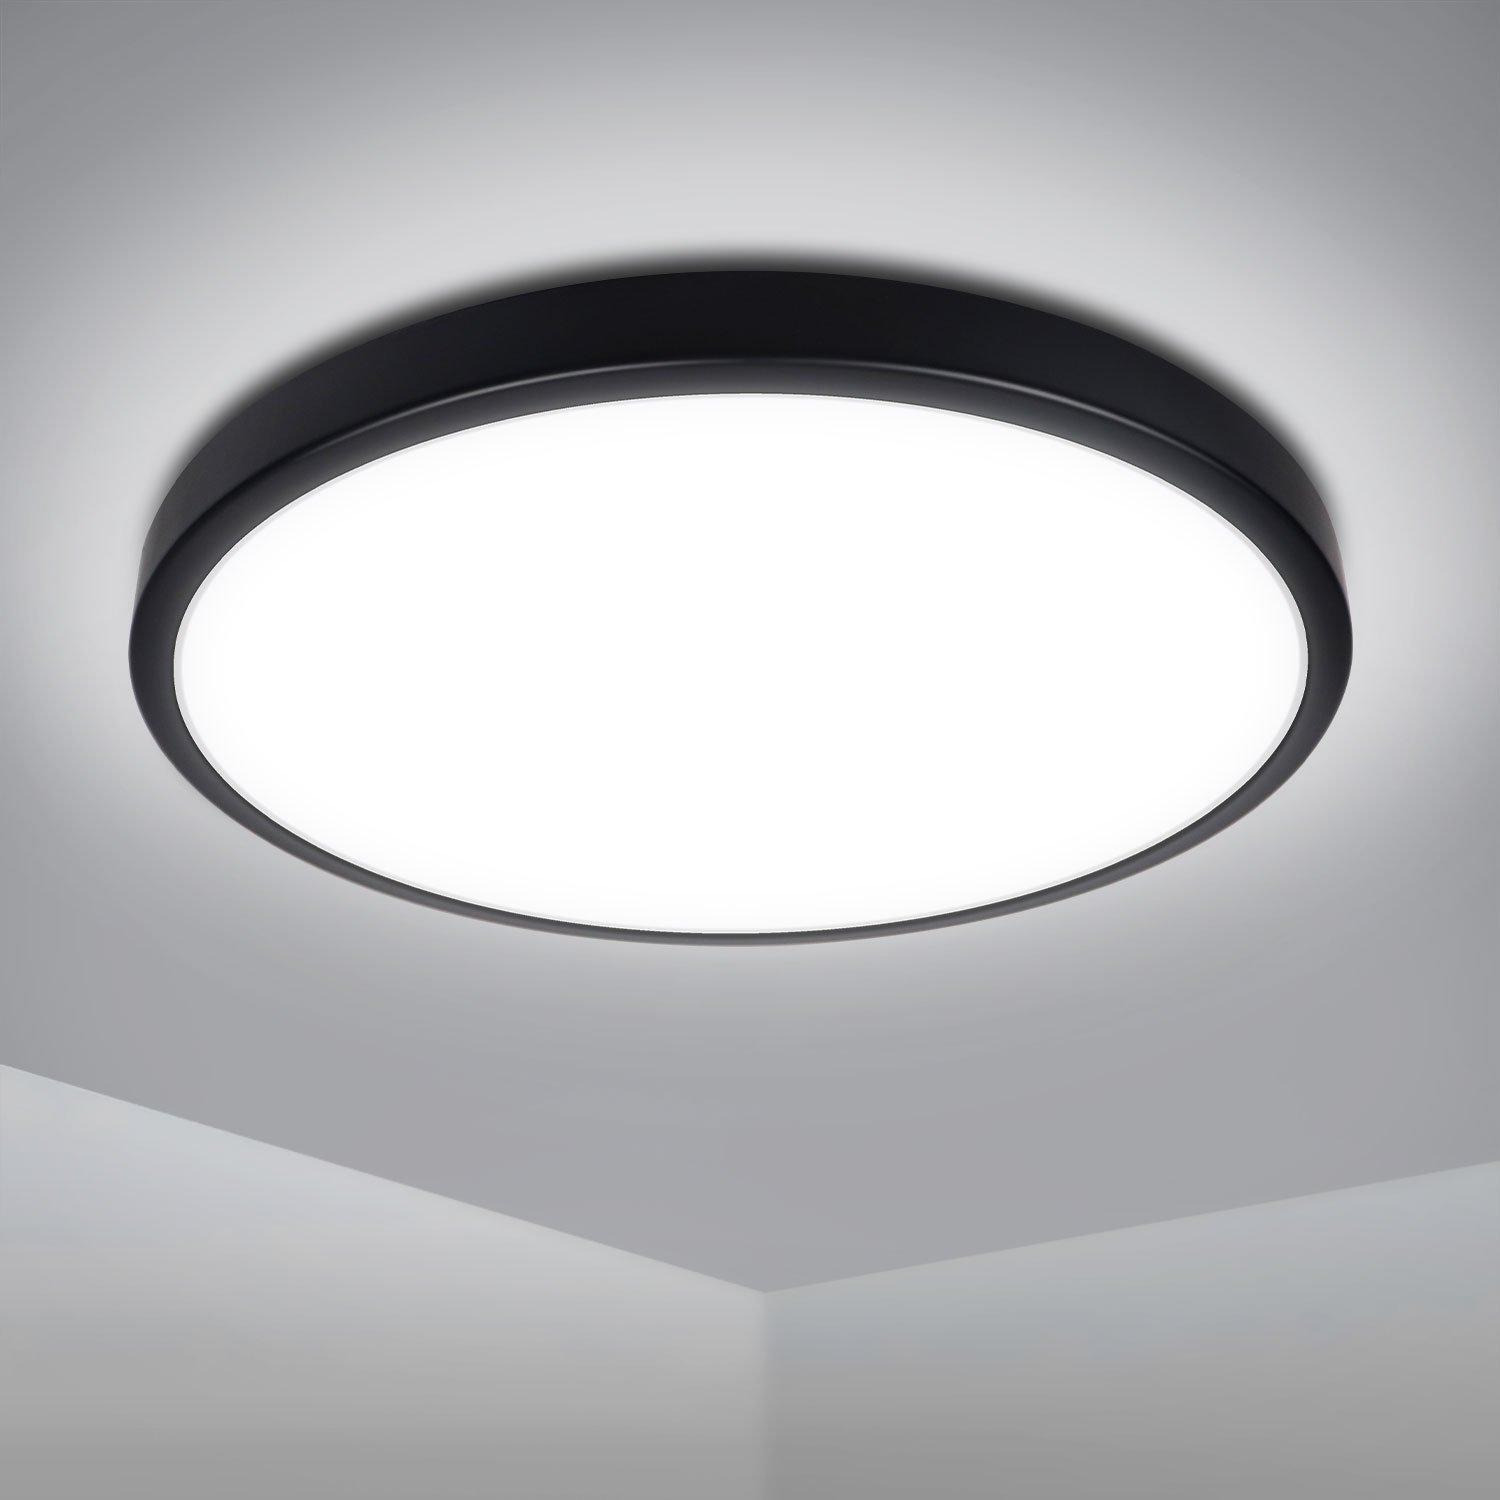 18W Bathroom LED round Surface Mount Integrated Ceiling Light Flush Light Cold White, Waterproof, Black, IP54, 33cm (Dia) - image 1